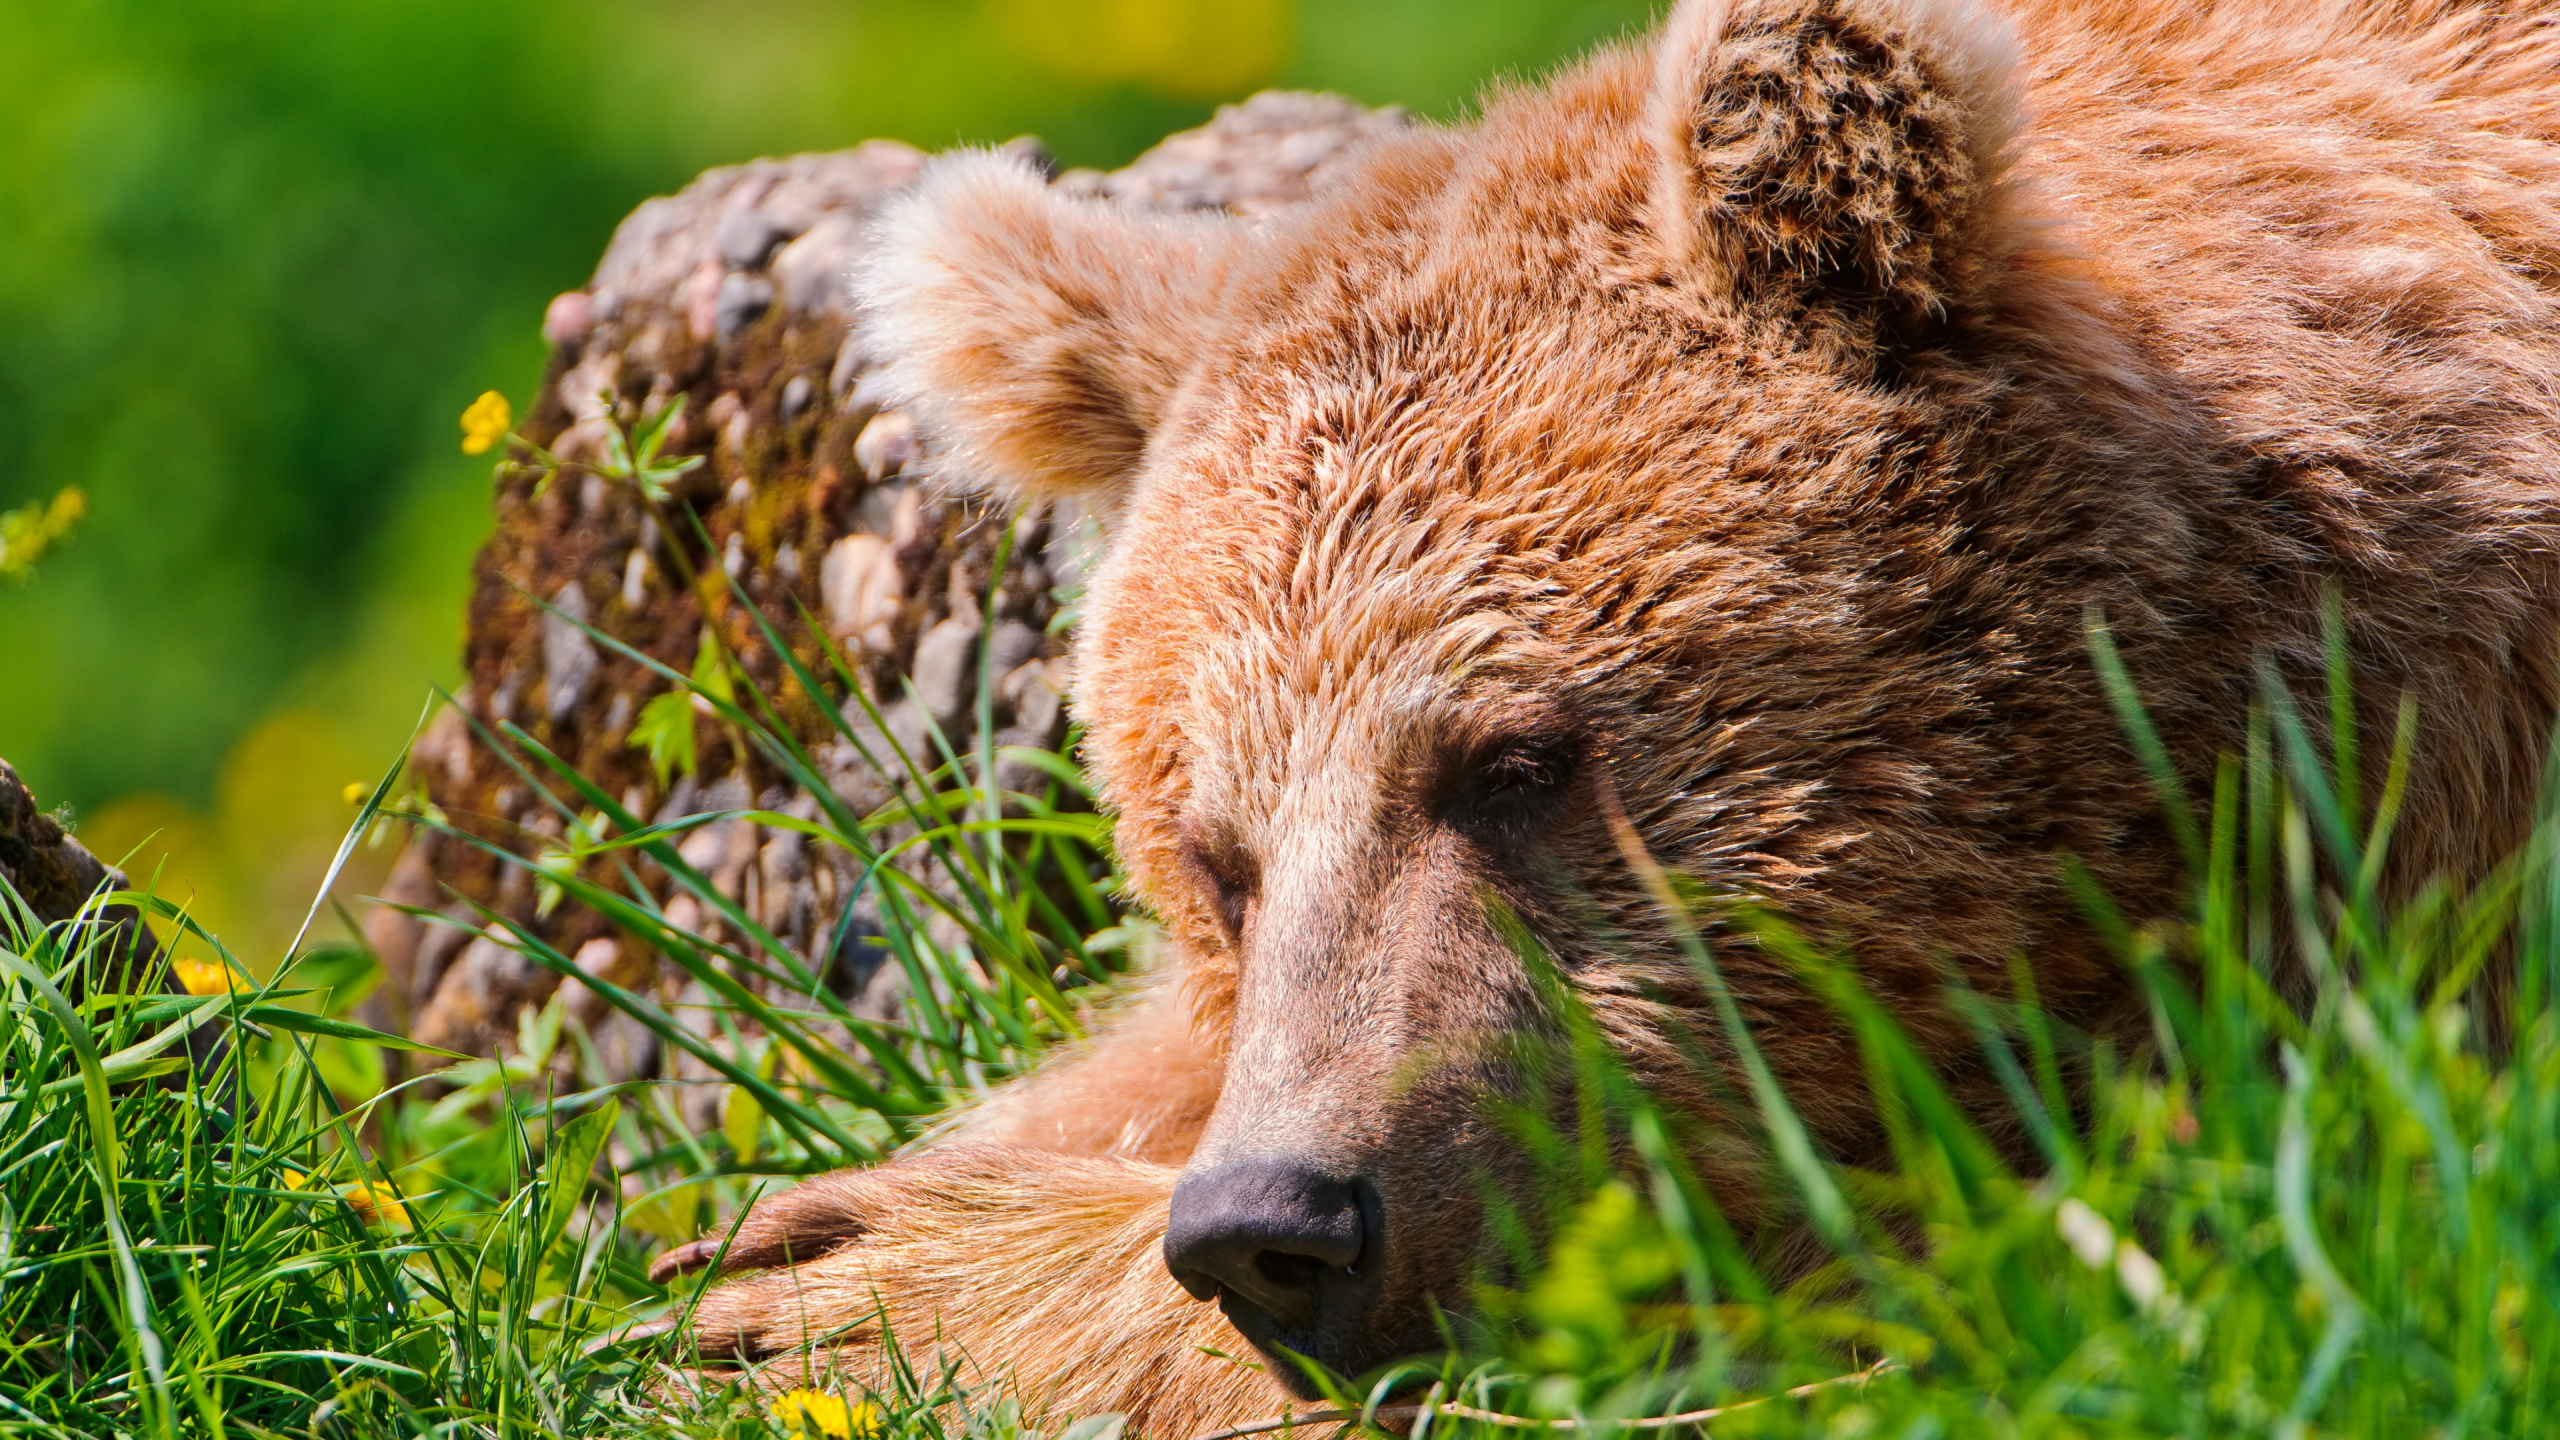 Brown Bear on Green Grass During Daytime. Wallpaper in 2560x1440 Resolution